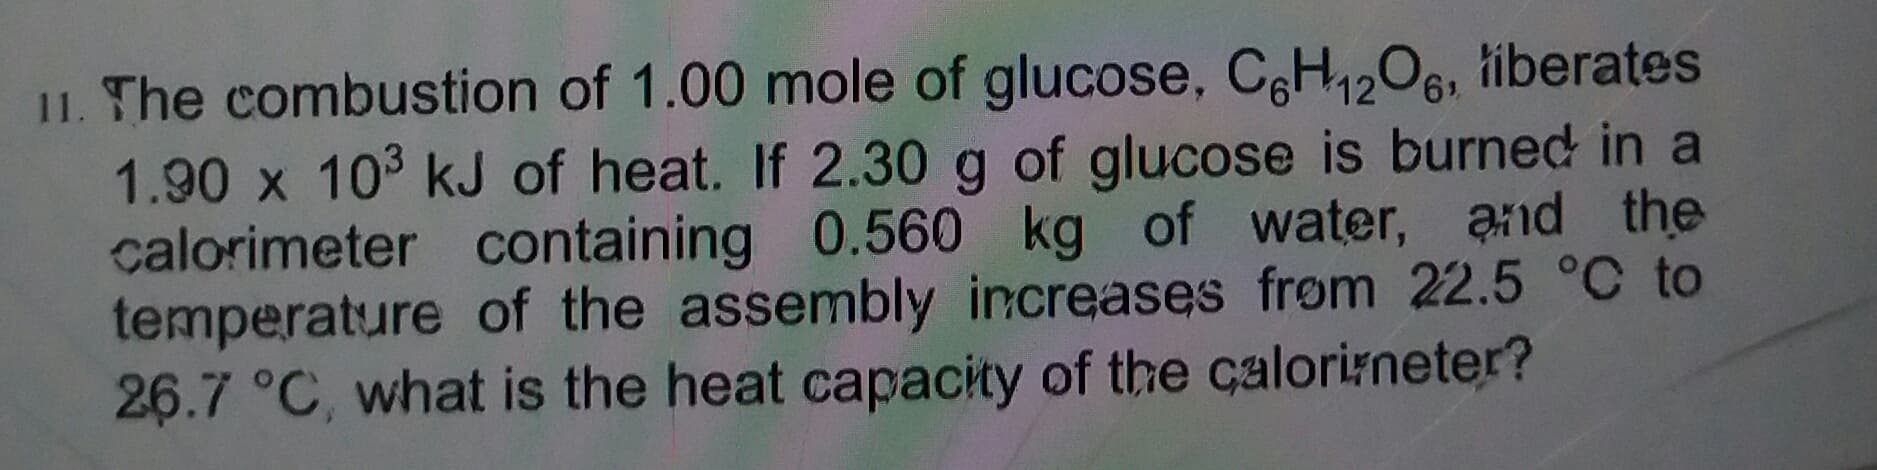 1. The combustion of 1.00 mole of glucose, CeH12O6, tiberates
1.90 x 10 kJ of heat. If 2.30 g of glucose is burned in a
calorimeter containing 0.560 kg of water, and the
temperature of the assembly increases frøm 22.5 °C to
26.7 °C, what is the heat capacity of the calorirneter?
